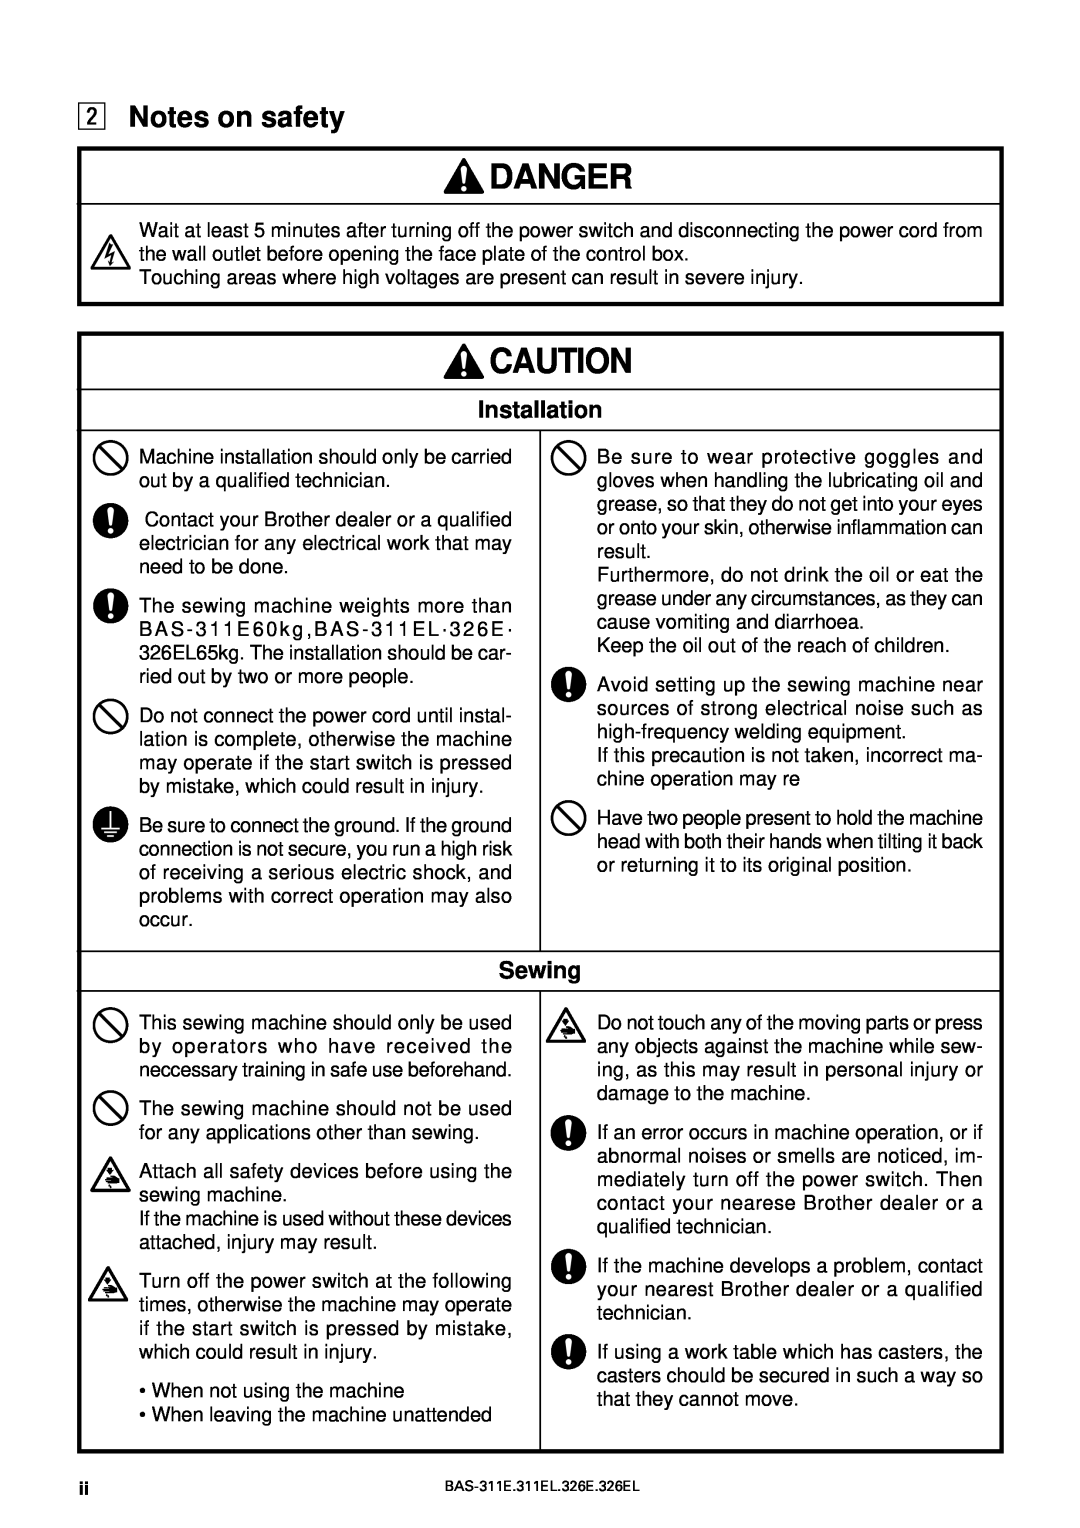 Brother BAS-311E service manual x Notes on safety, Installation, Sewing, Danger 